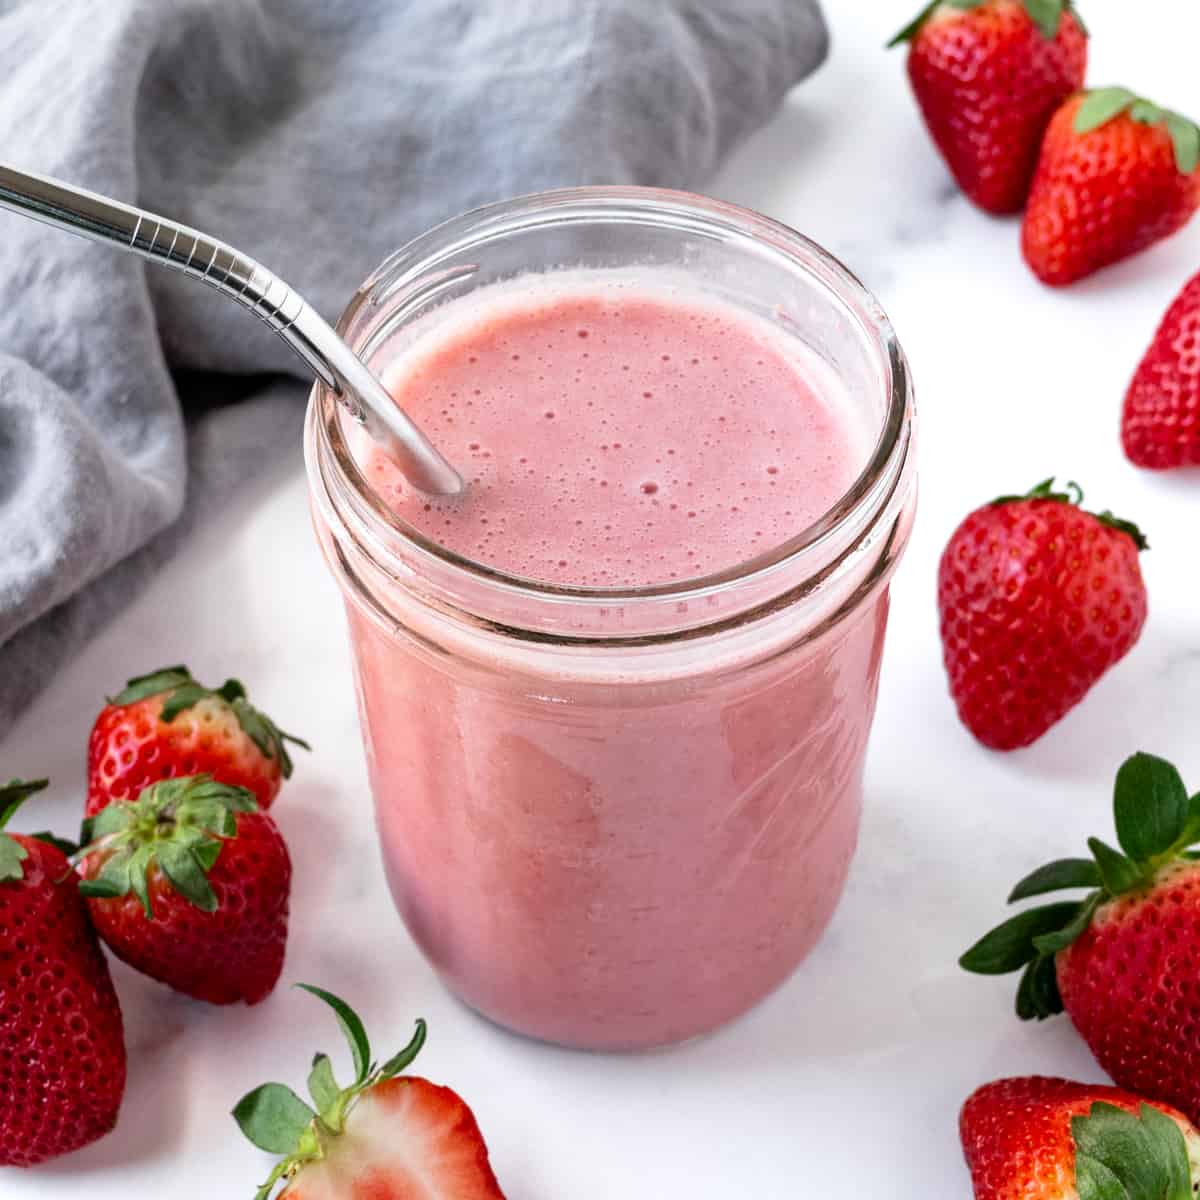 Almond Milk Strawberry Smoothie in a glass with a metal straw on a marble countertop.